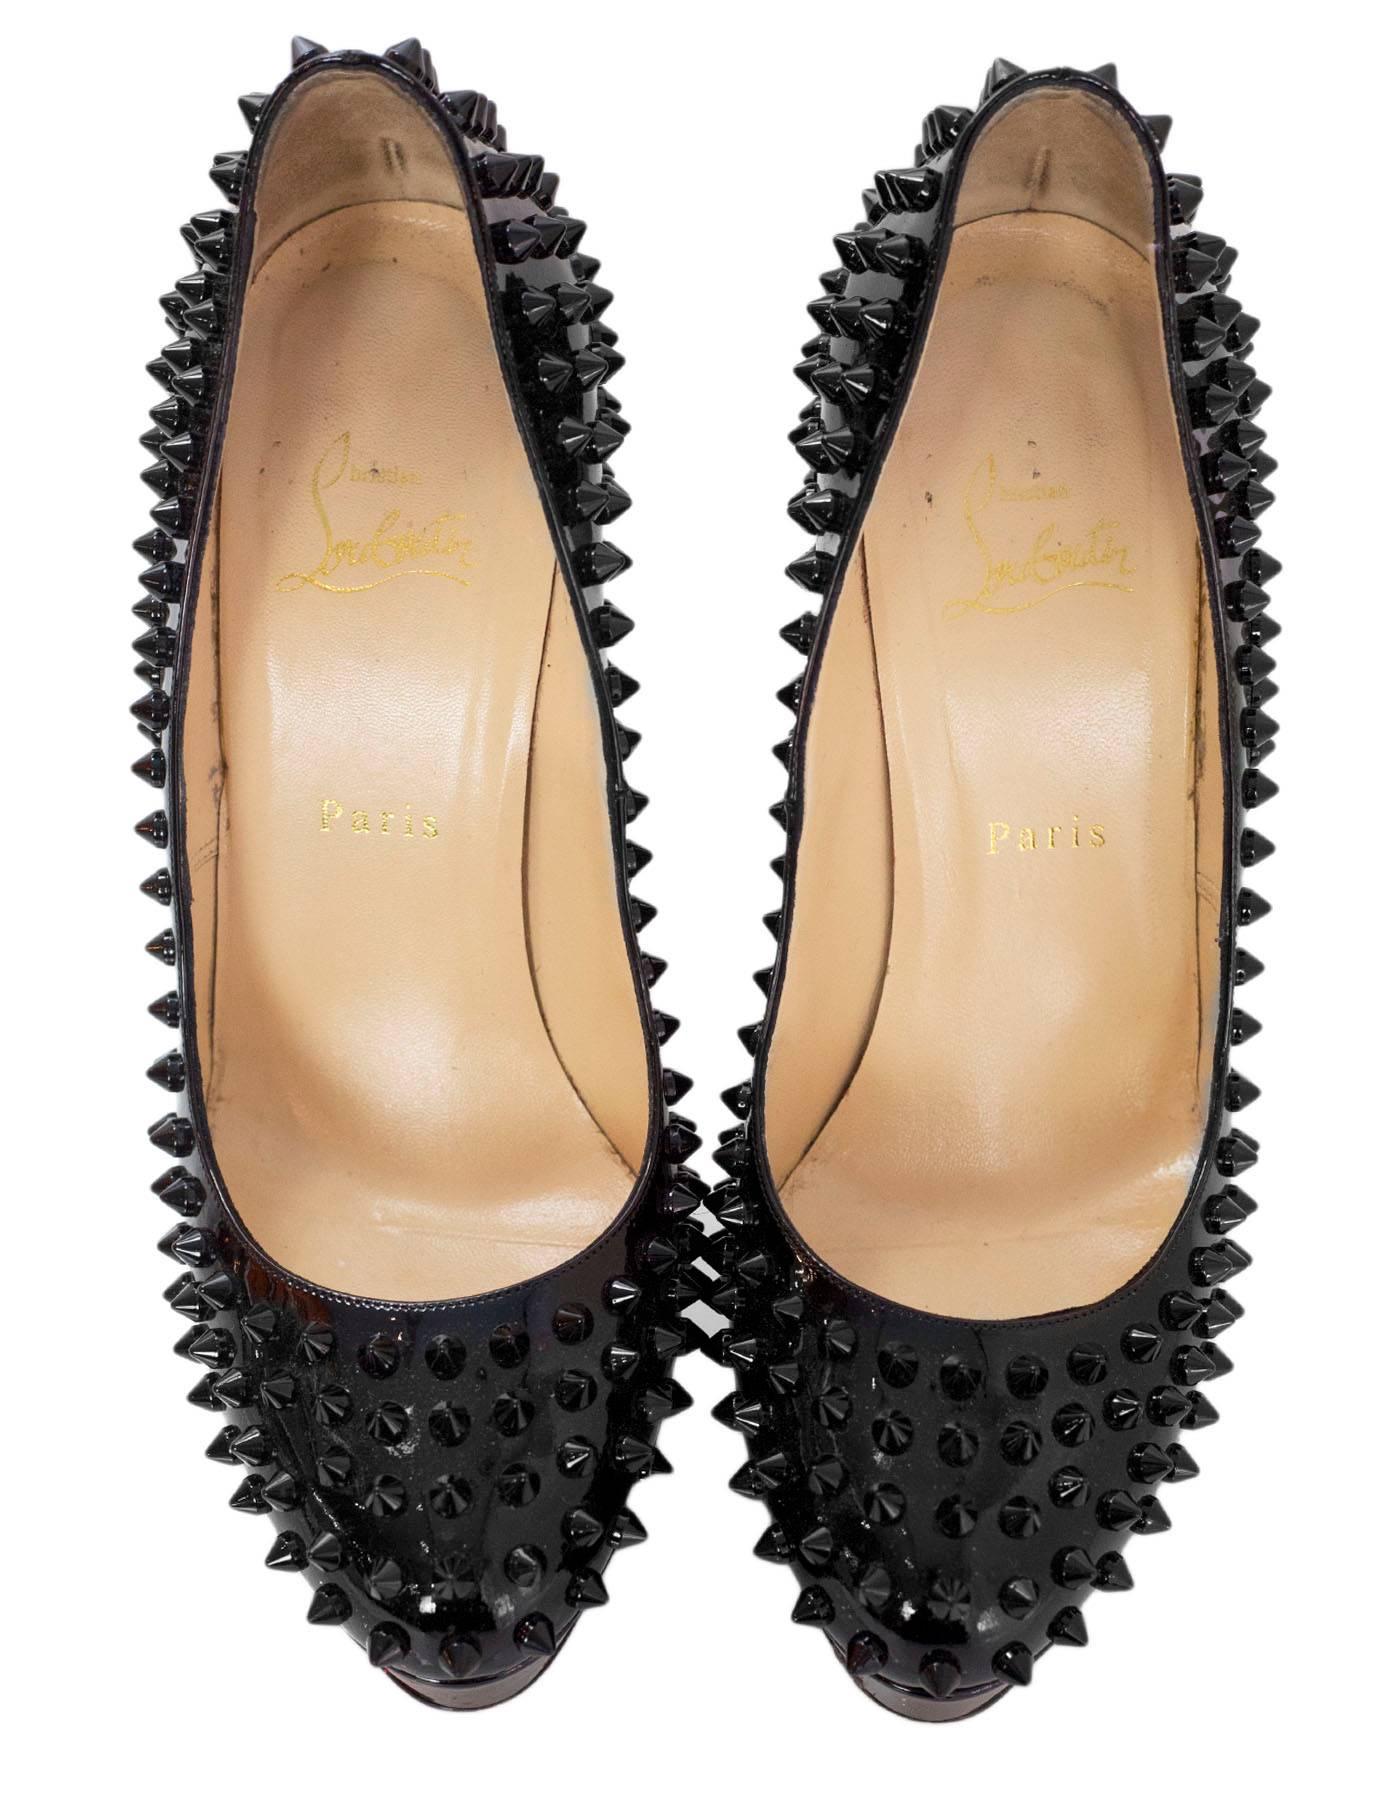 Christian Louboutin Black Spike Patent Leather Bianca 140 Pumps Sz 39 with Box In Excellent Condition In New York, NY